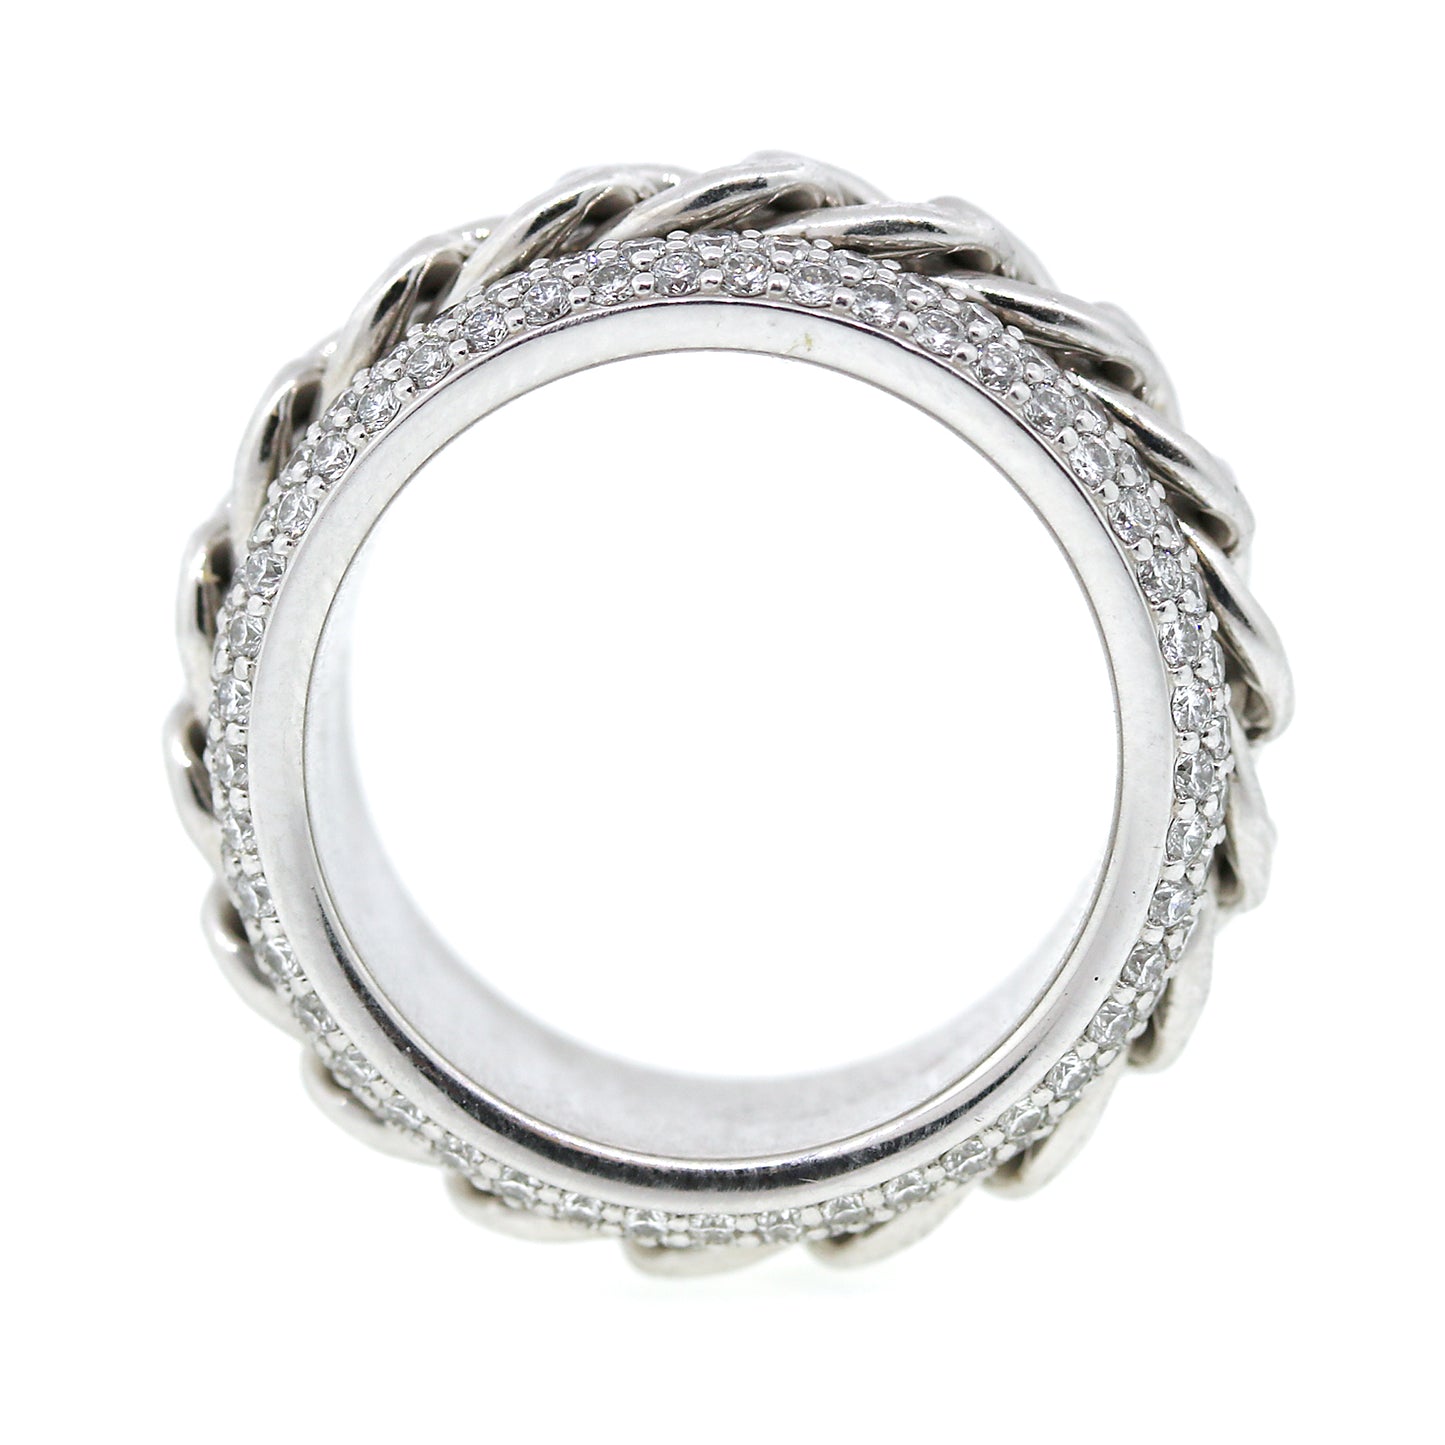 Piaget Diamond & Chainlink Ring in 18k Gold